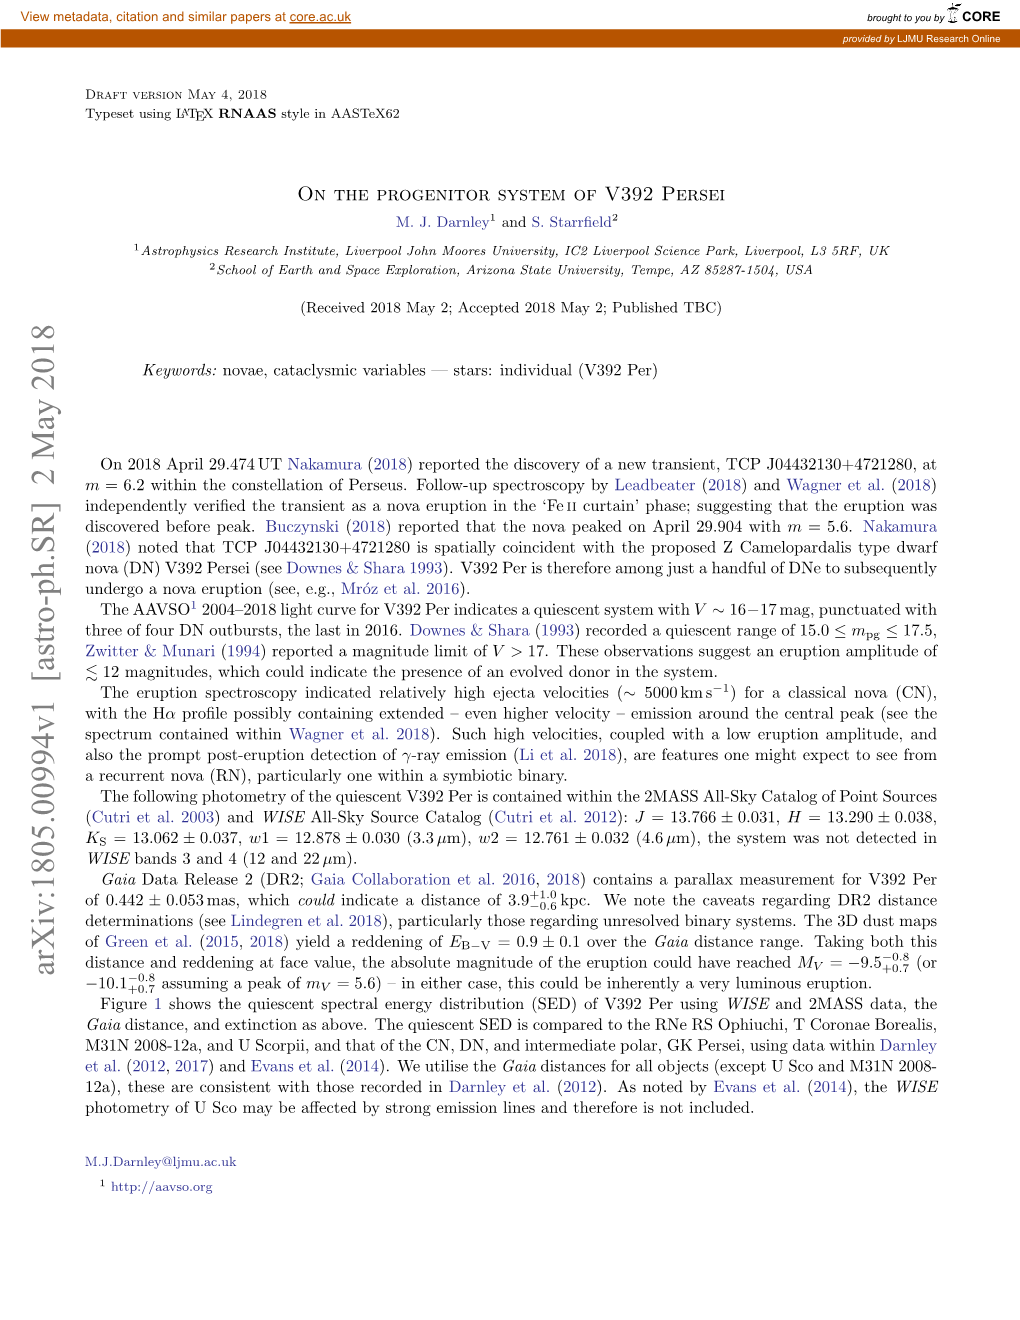 Arxiv:1805.00994V1 [Astro-Ph.SR] 2 May 2018 −0.8 −10.1+0.7 Assuming a Peak of Mv = 5.6) – in Either Case, This Could Be Inherently a Very Luminous Eruption